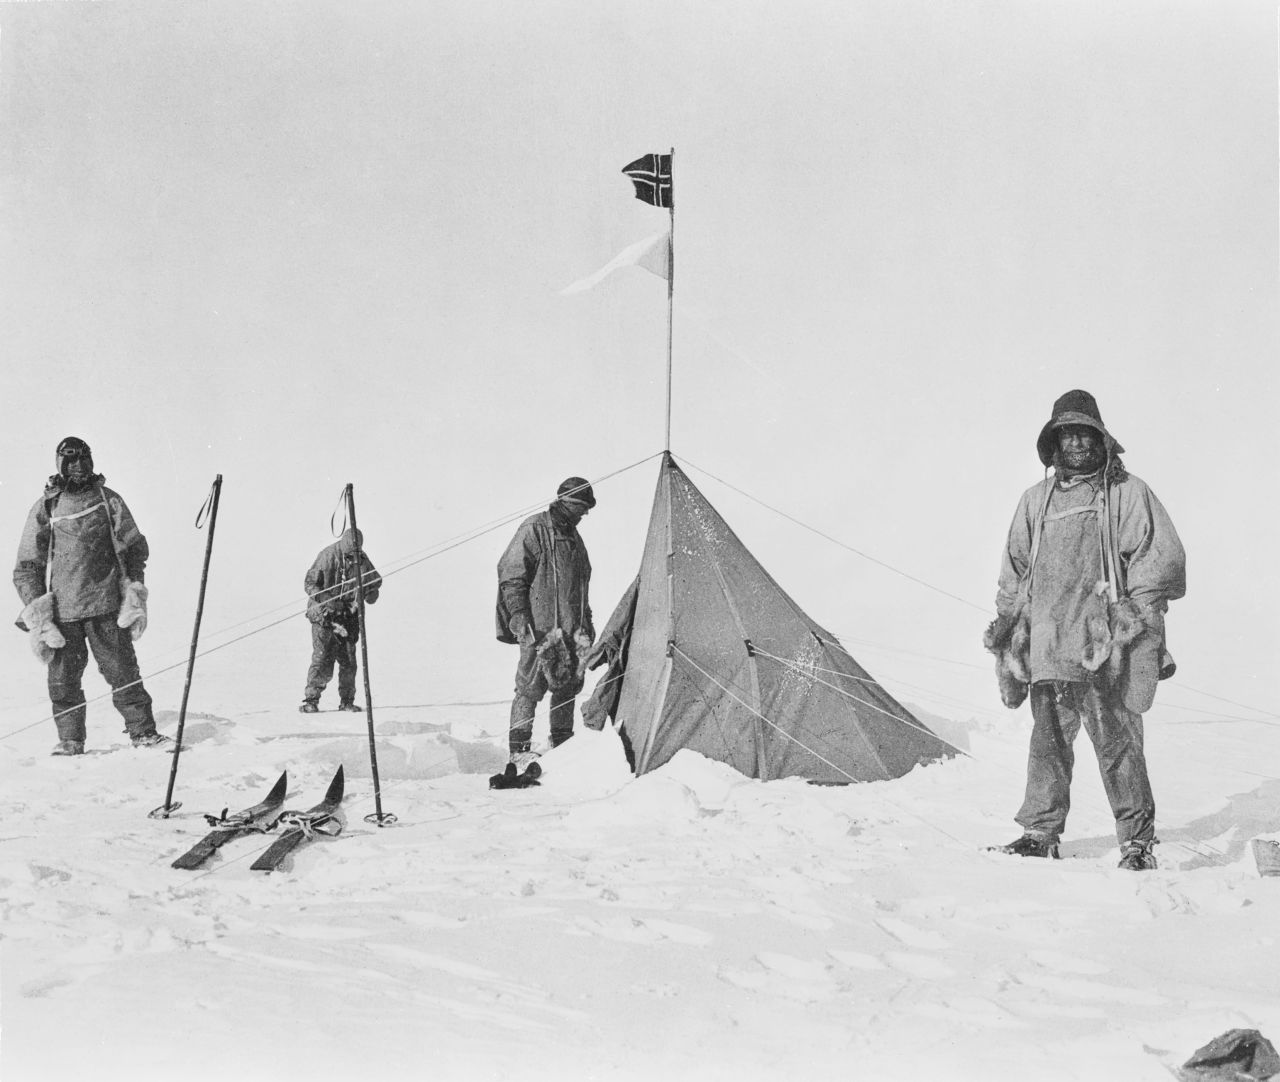 Scott and his men made it to the South Pole, but found rival Norwegian explorer Roald Amundsen's tent already there. They died on the return journey. Photo: Captain Scott and his party at the South Pole.